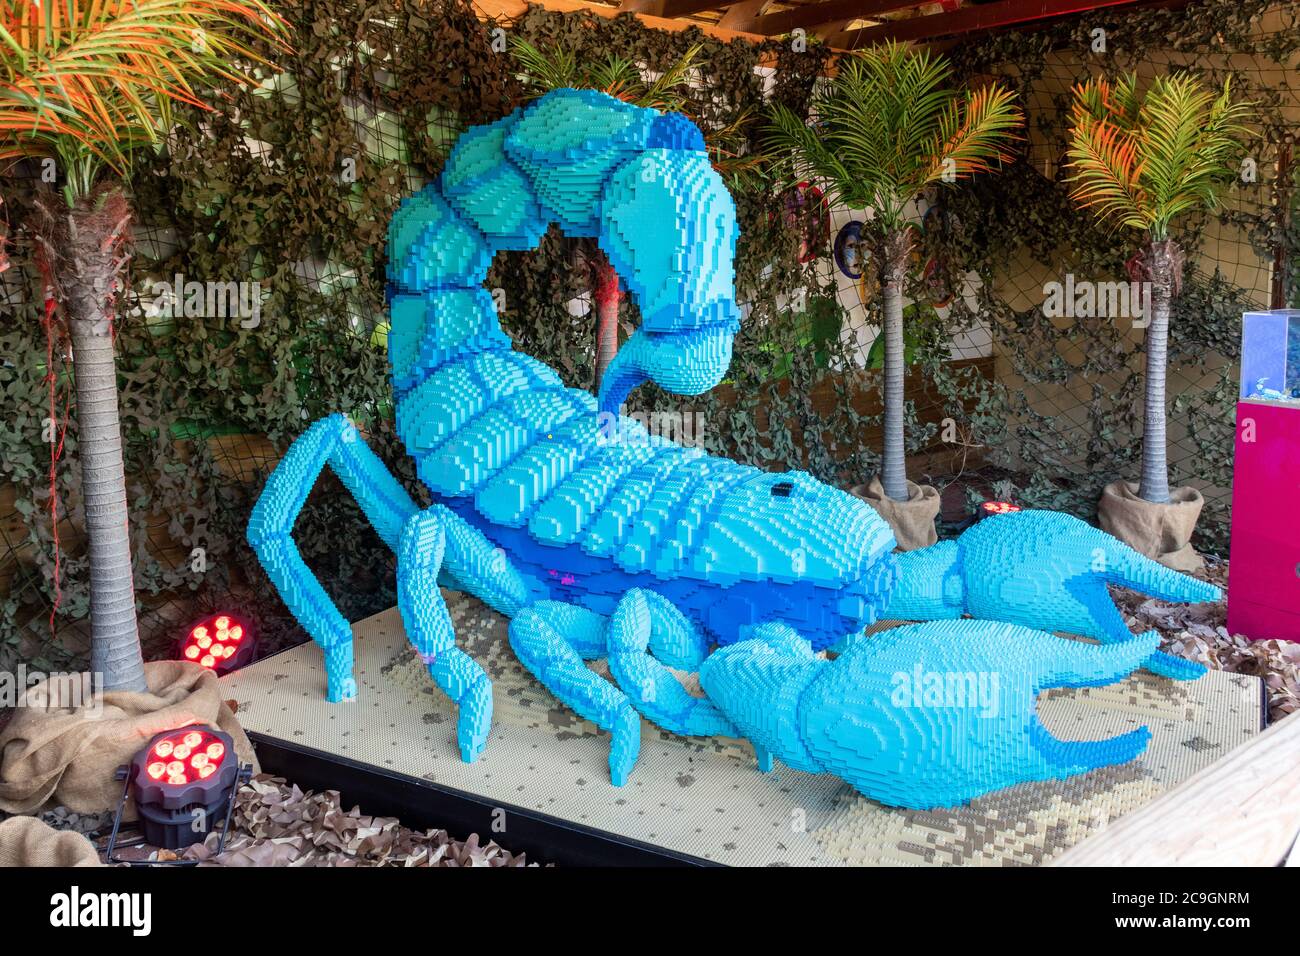 Supersized lego brick animal models at Marwell Zoo, UK, a childrens activity trail. A scorpion model Stock Photo